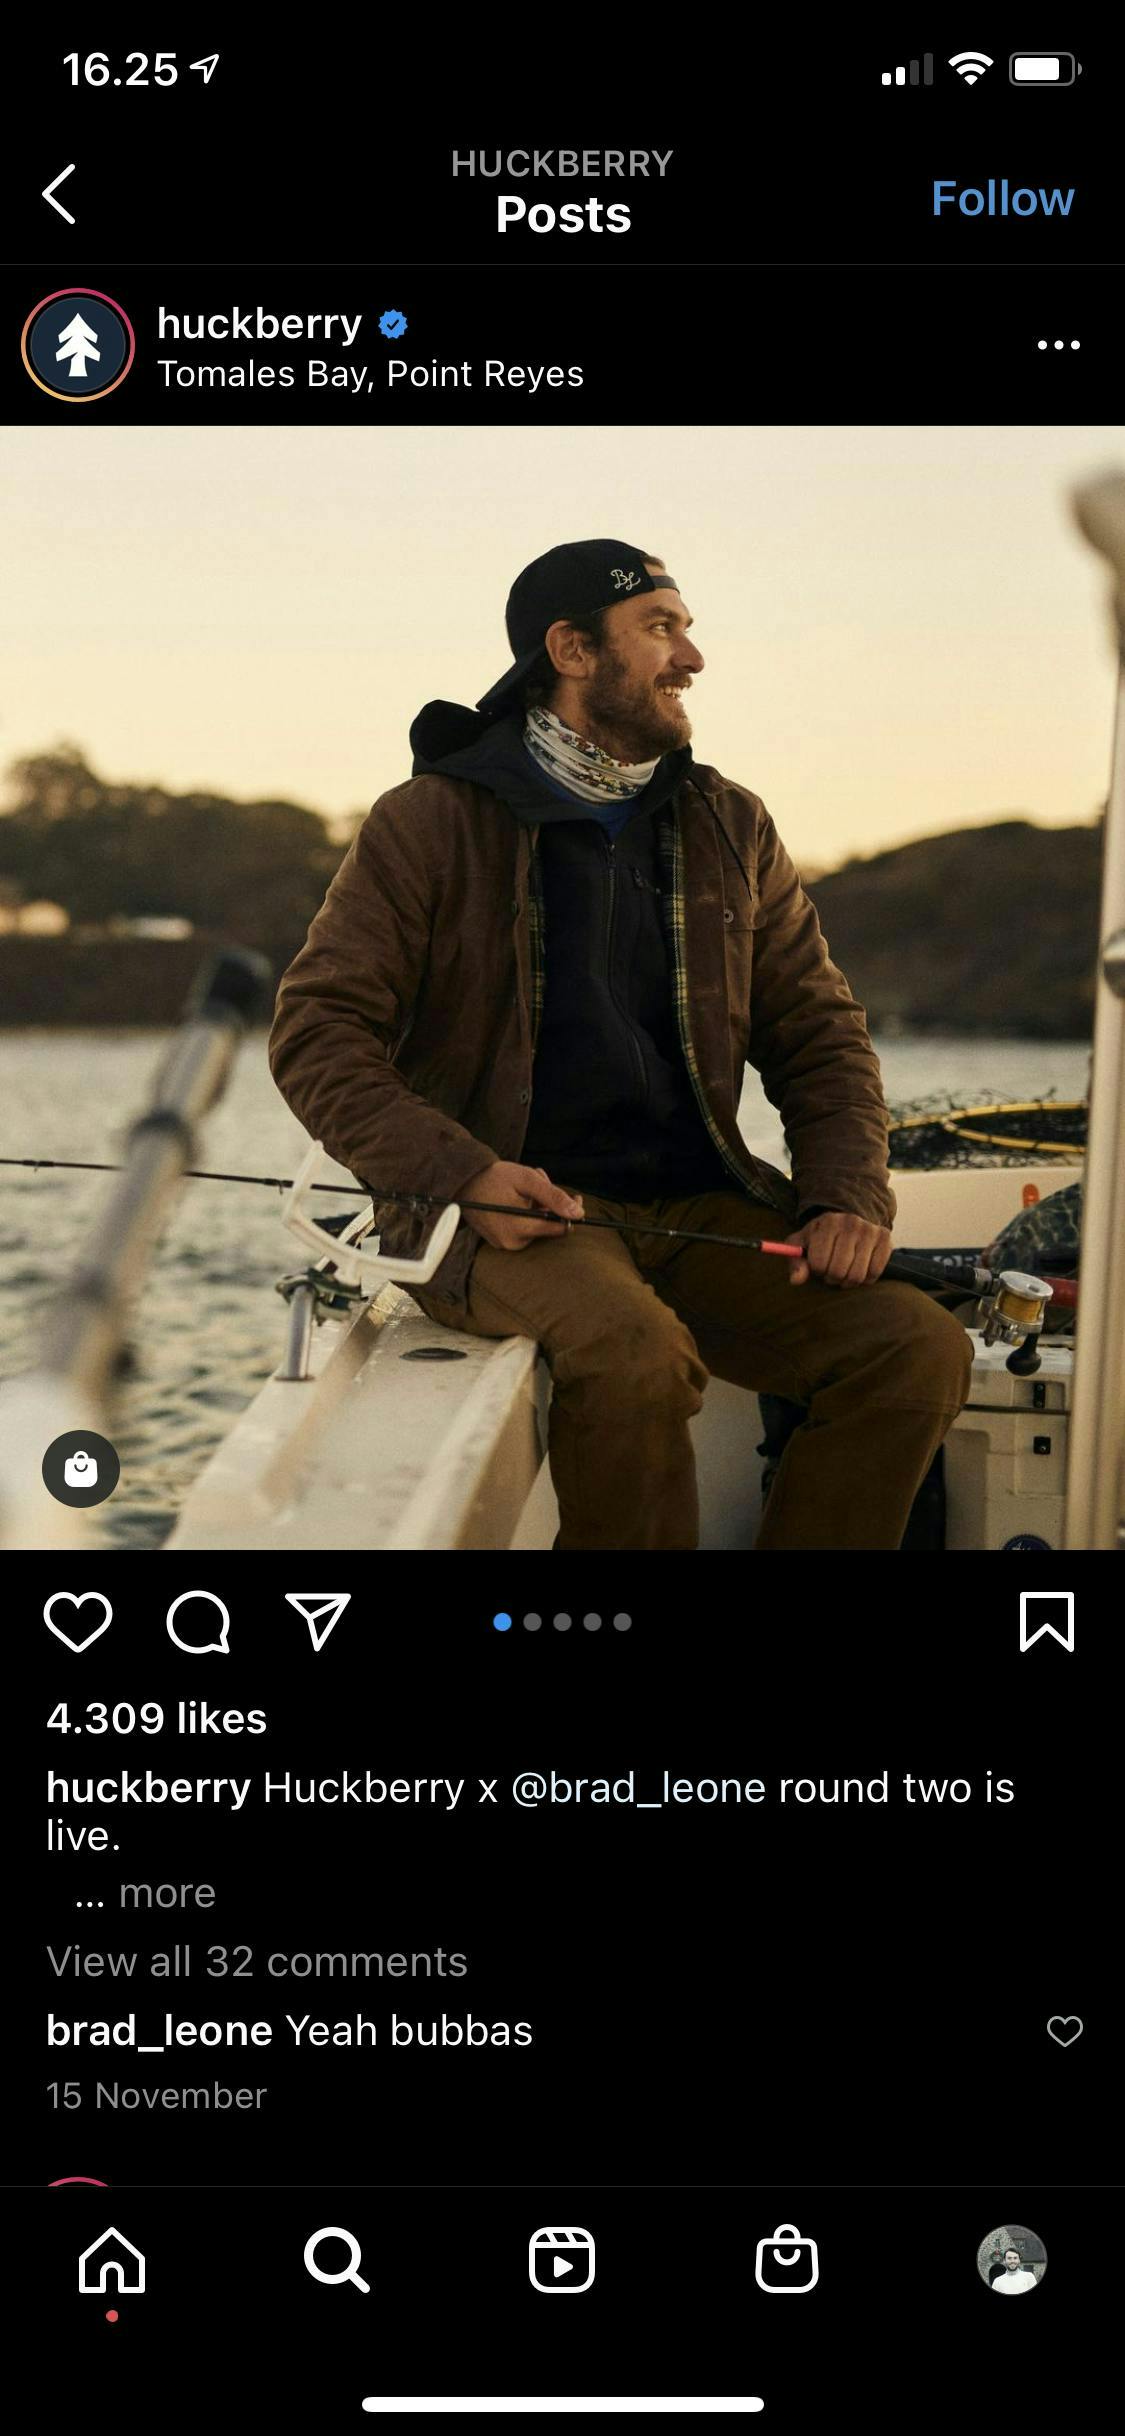 an image of model wearing Huckberry's clothing